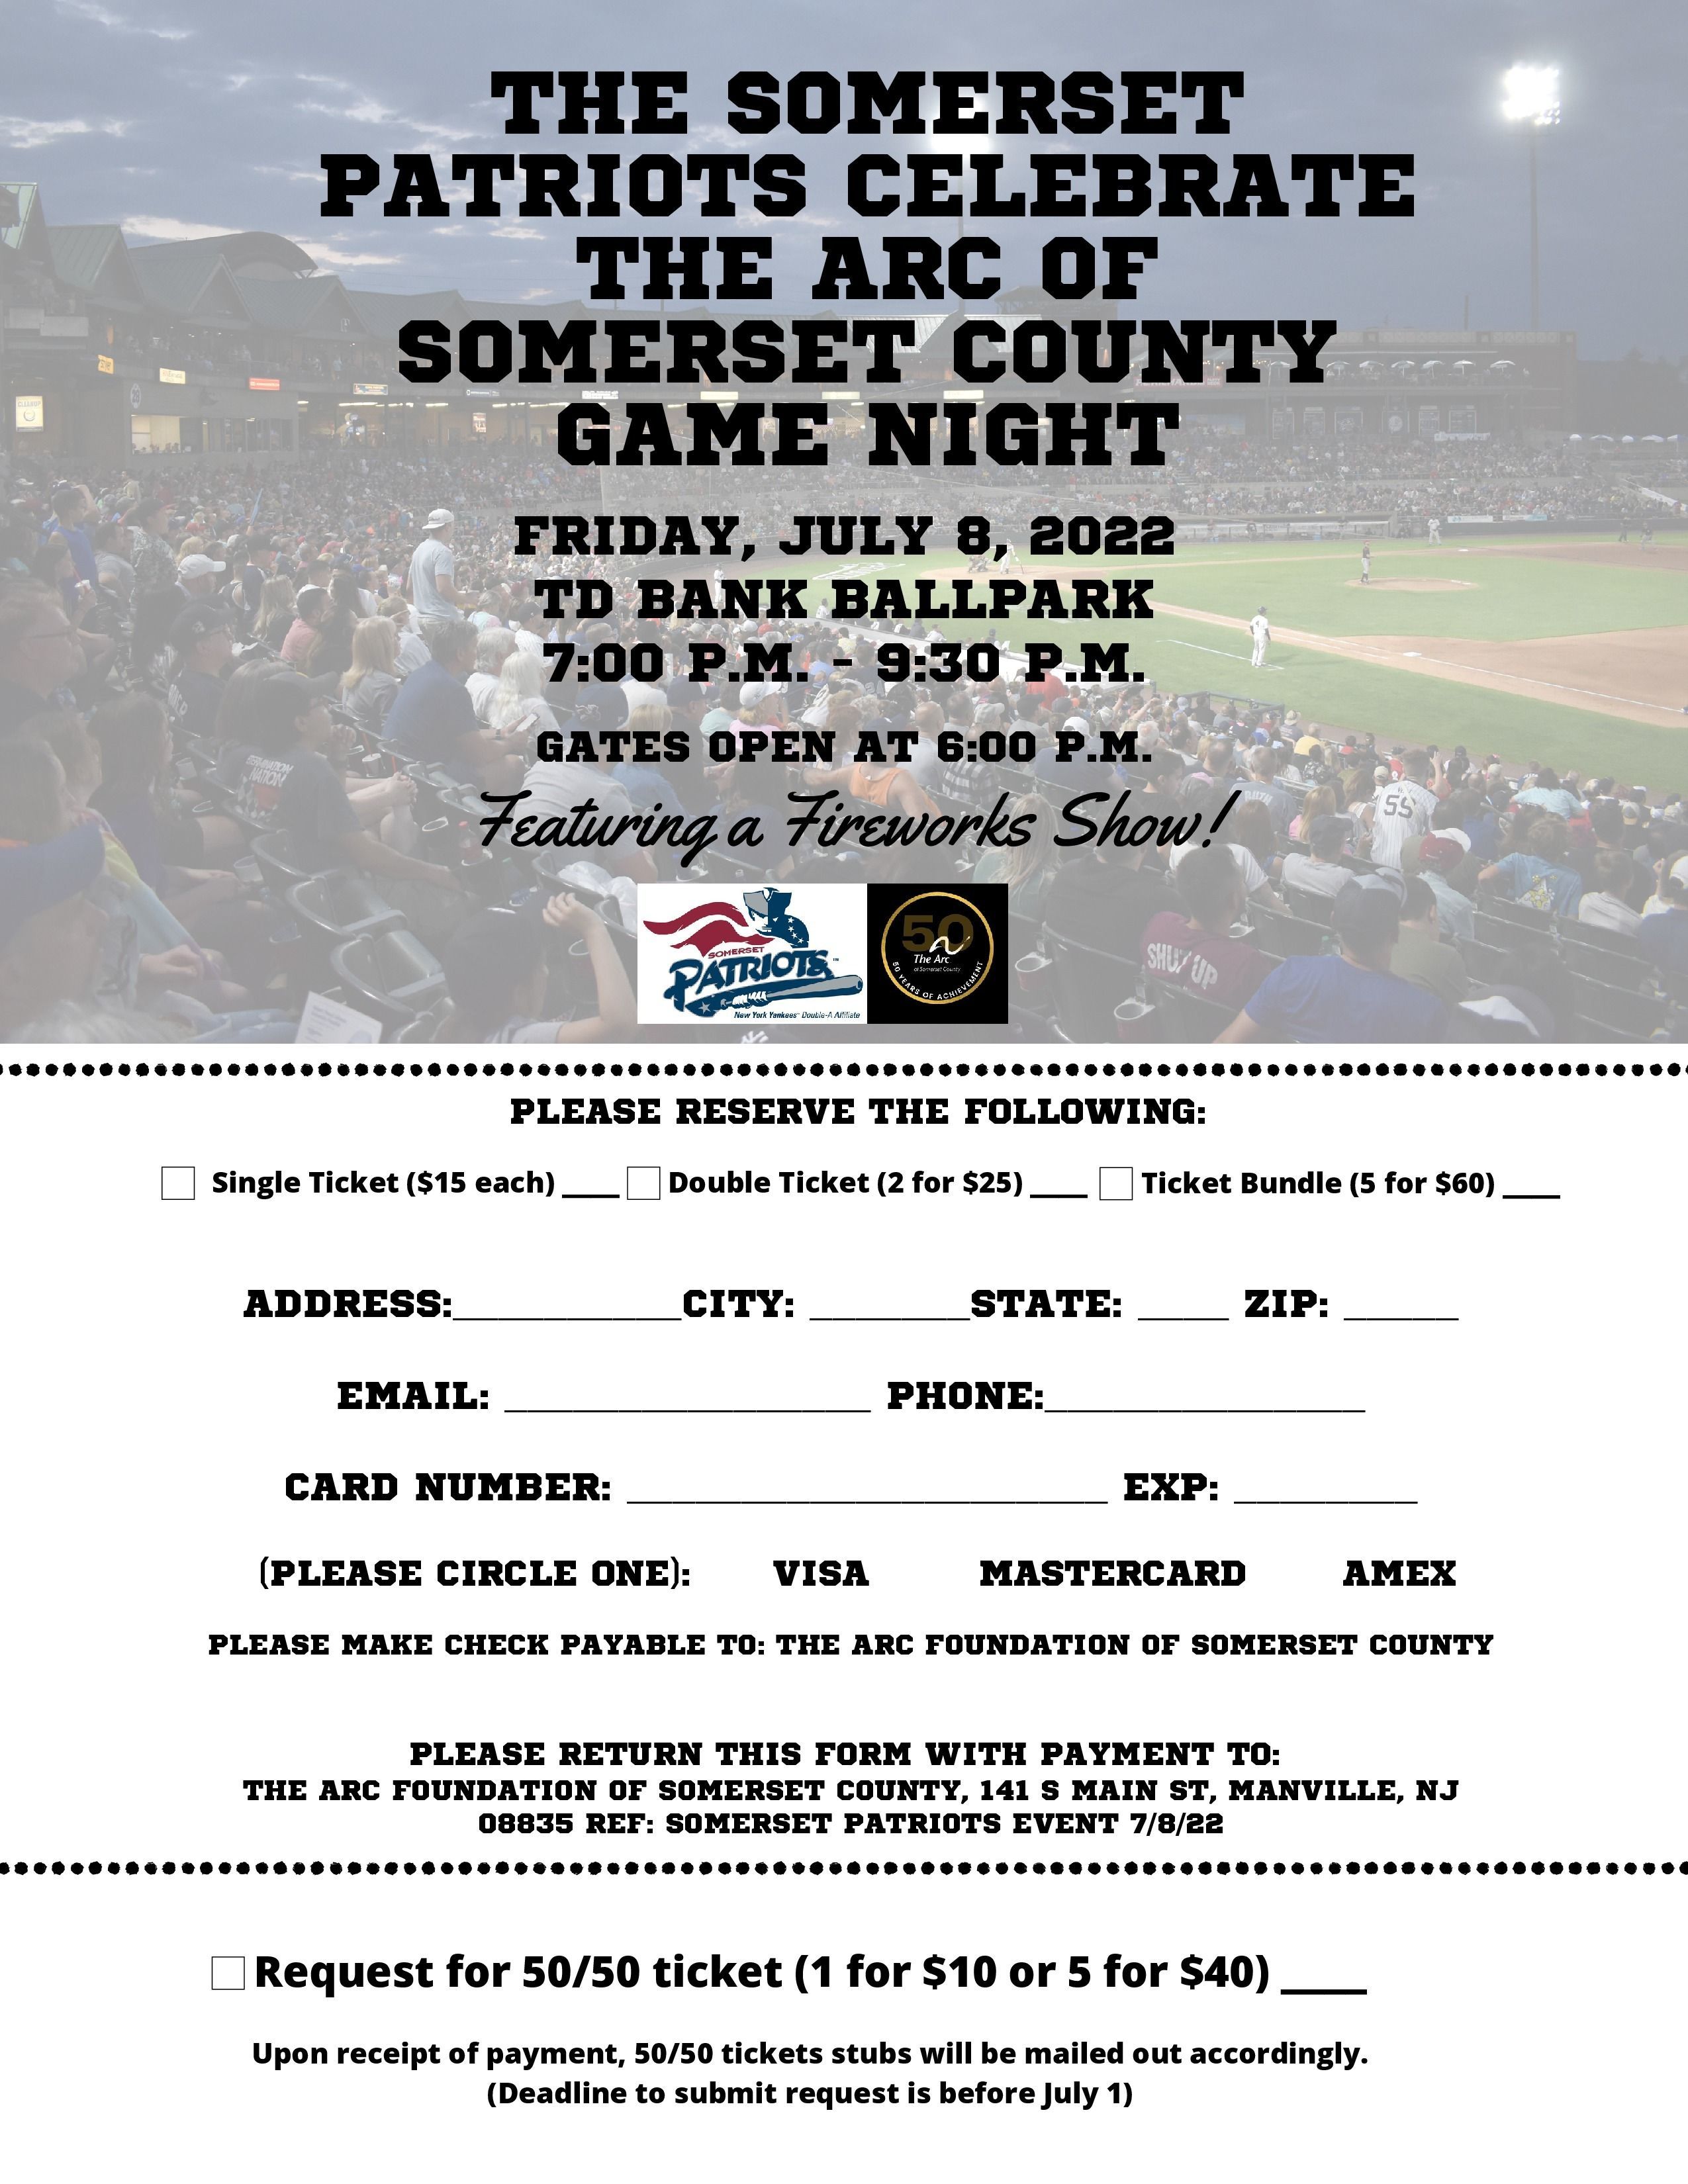 Somerset Patriots Game Night Celebrates The Arc of Somerset County